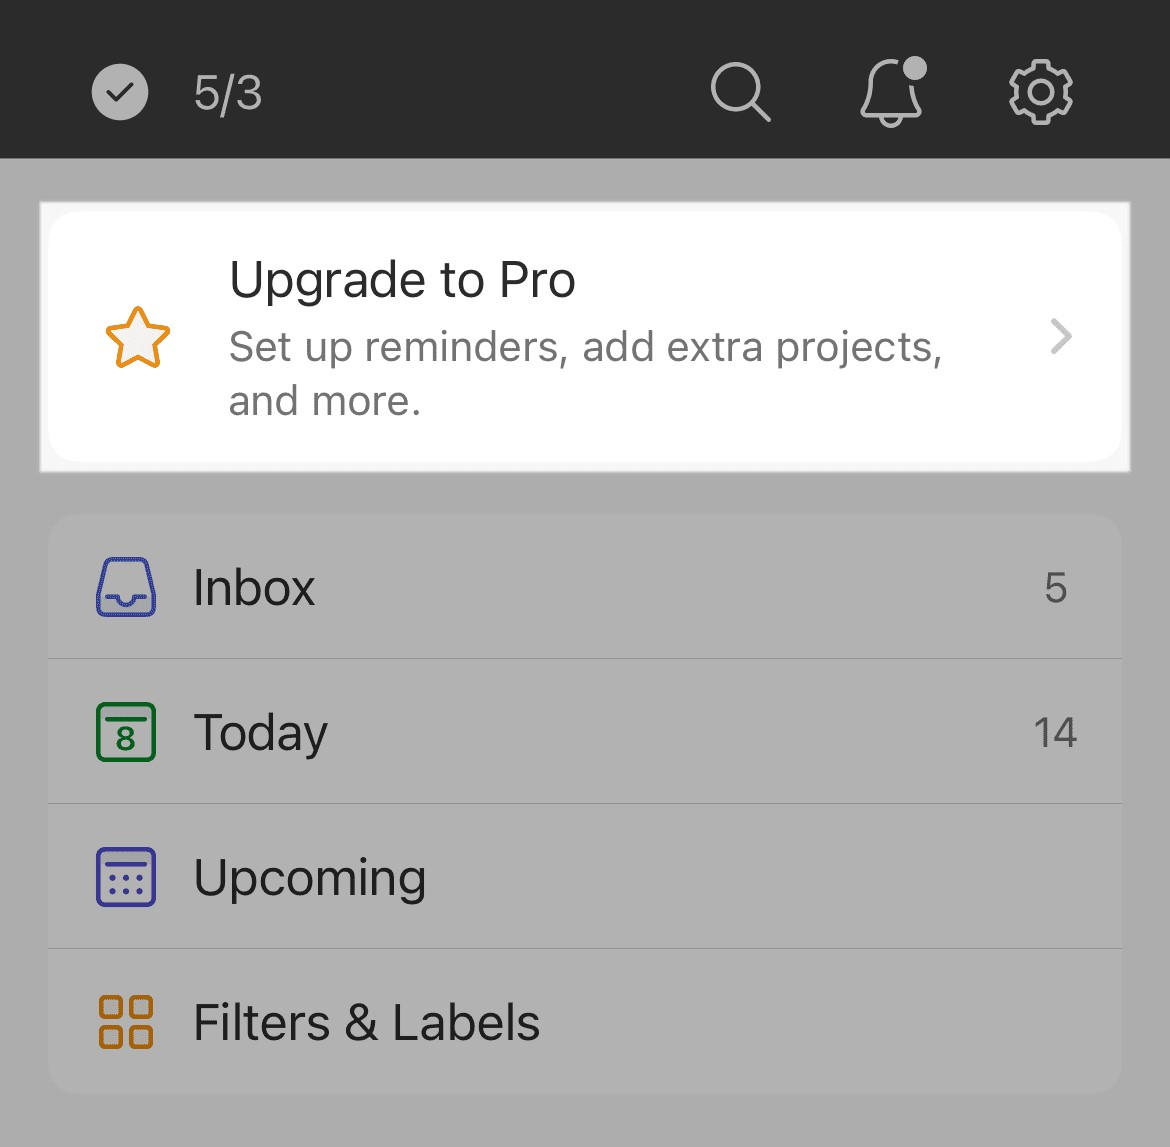 Native ad in Todoist mobile app encouraging users to upgrade to a Todoist Pro plan